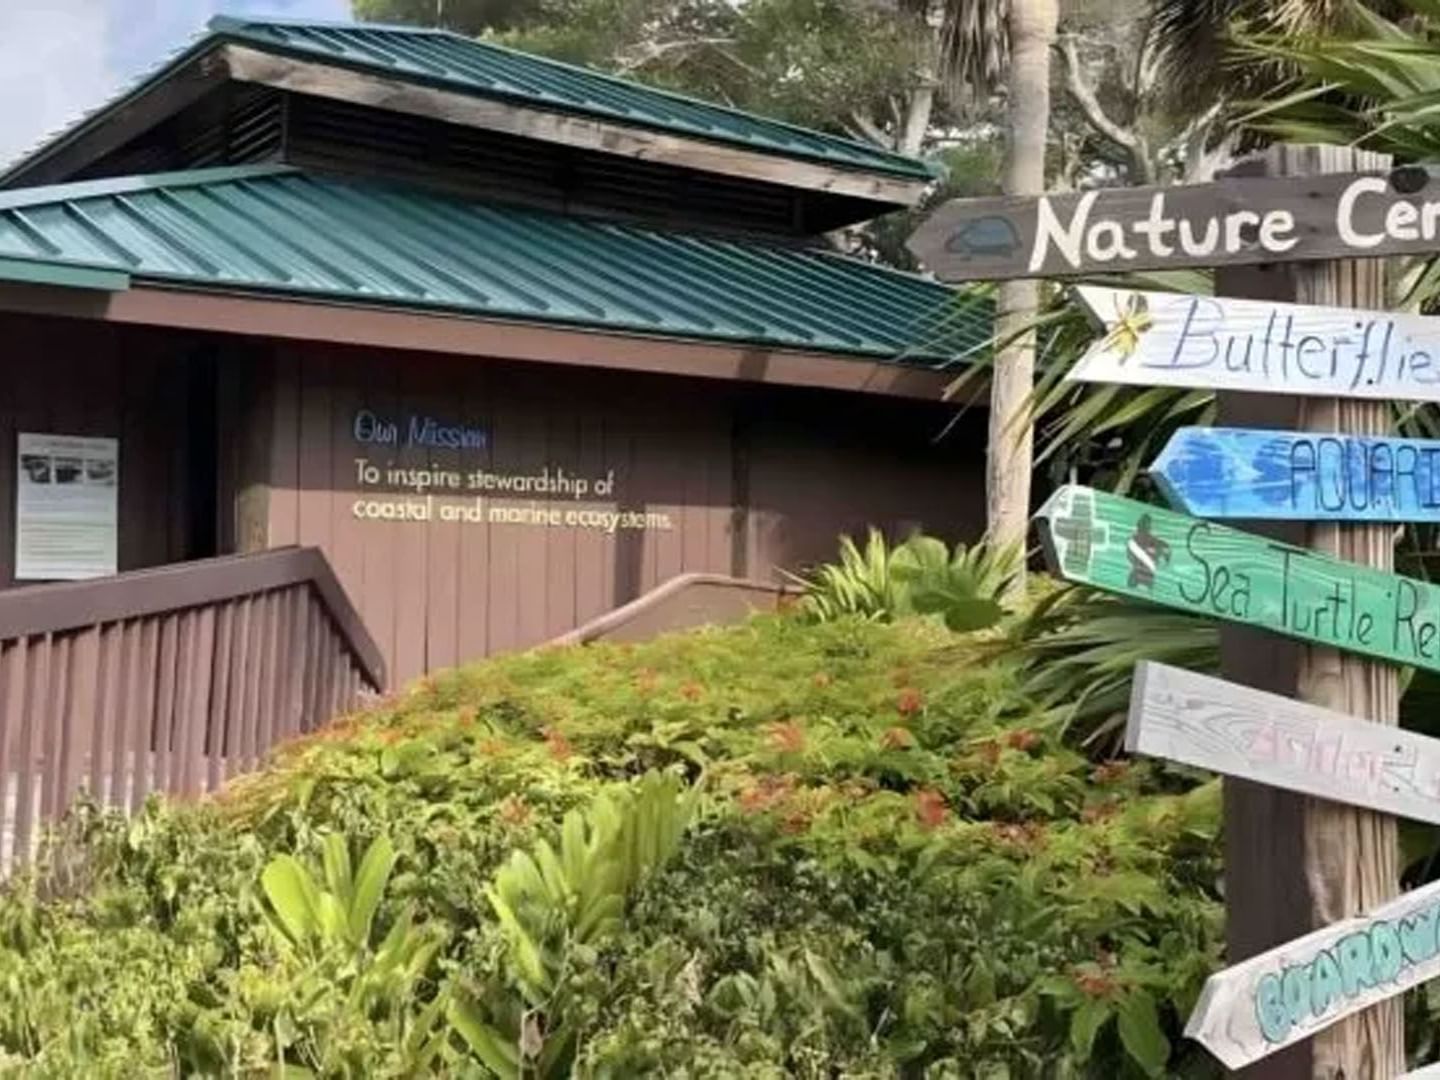 Direction signpost in front of a building in Gumbo Limbo Nature Center near Ocean Lodge Boca Raton